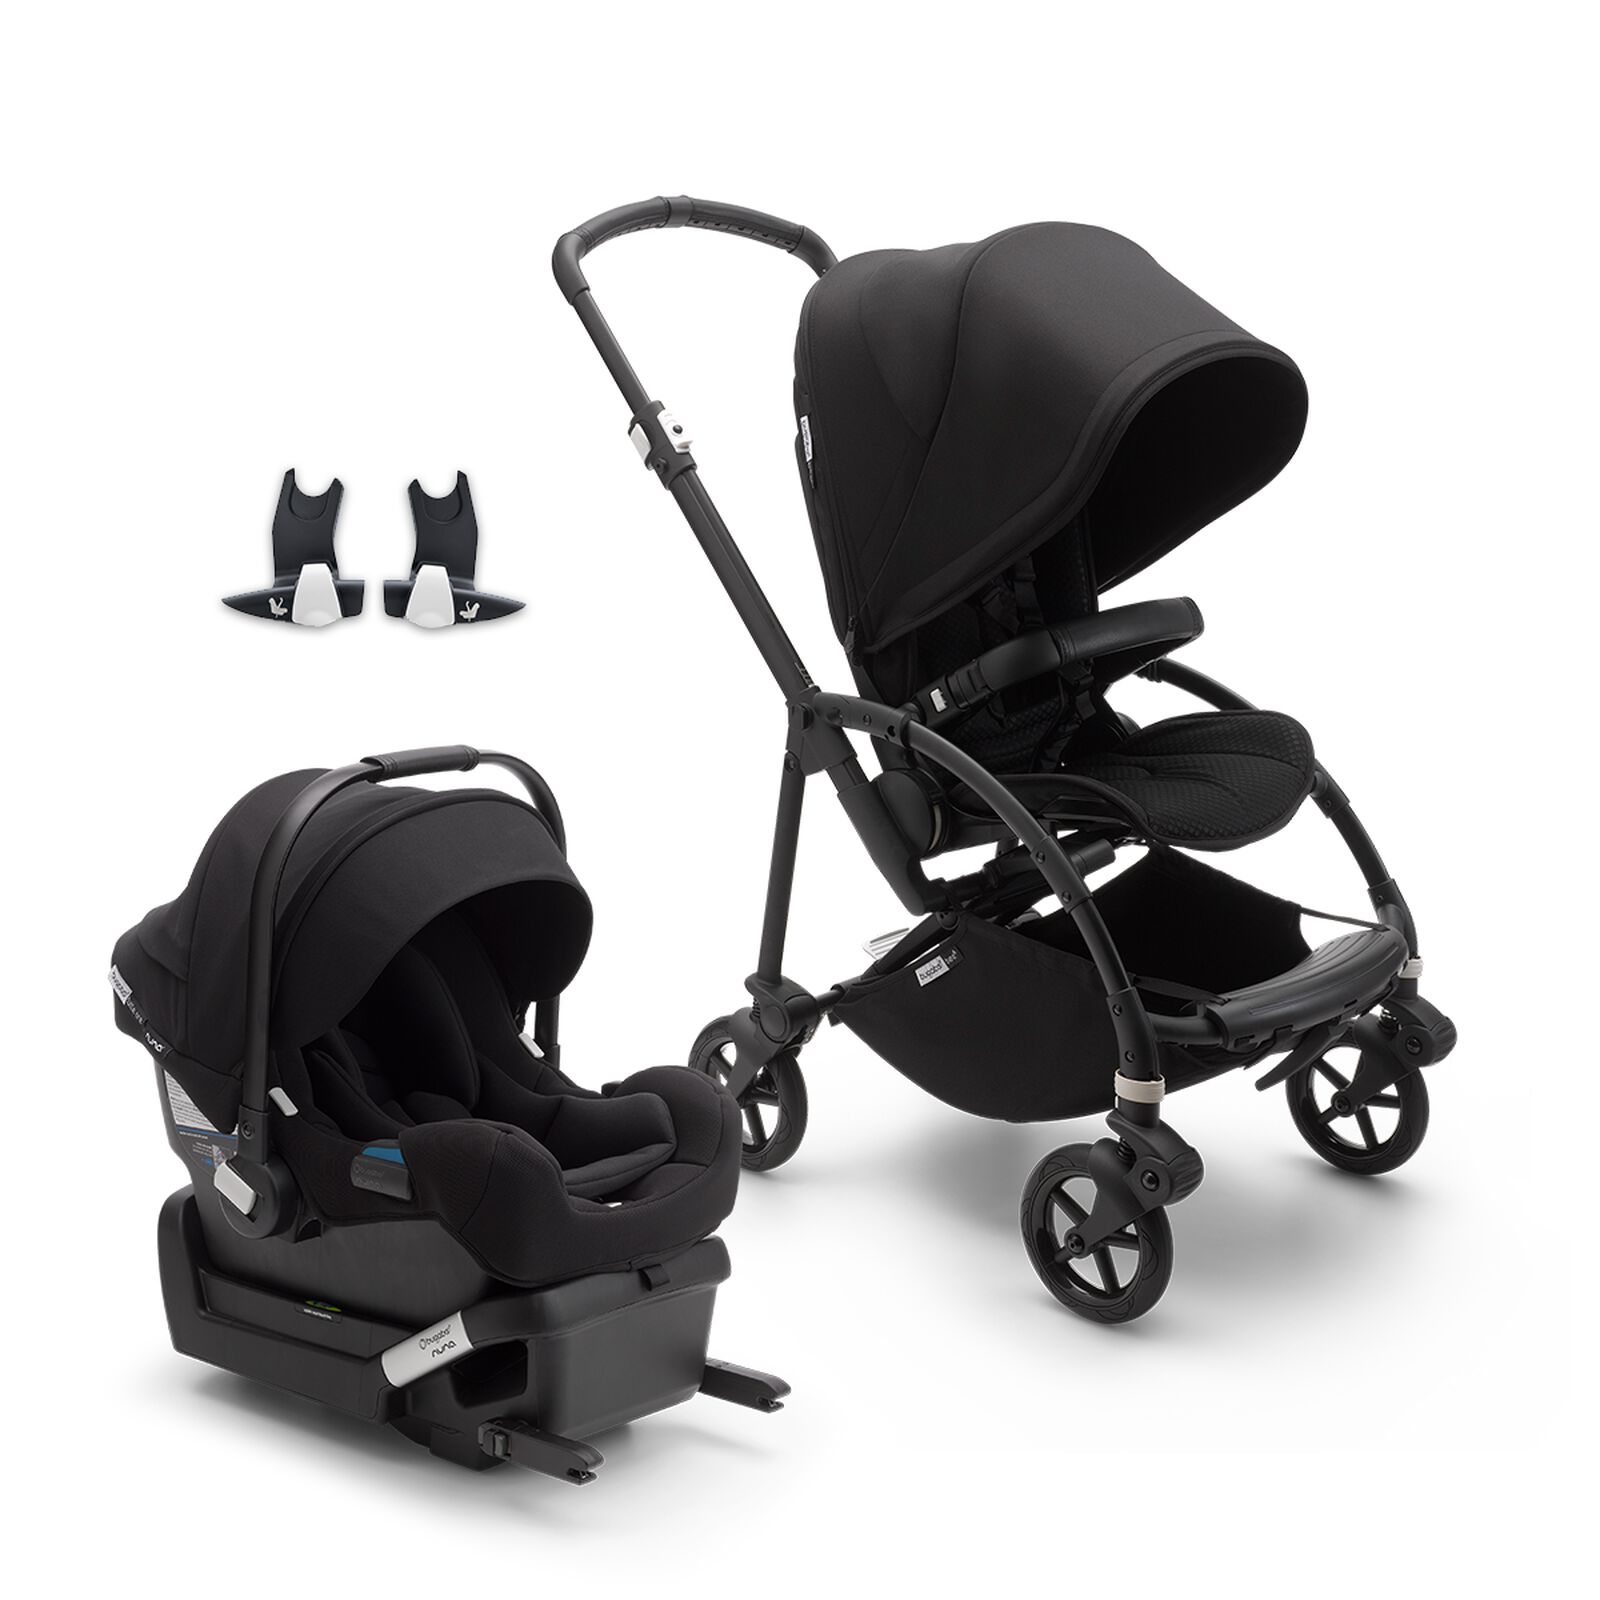 Bugaboo Bee 6 and Turtle One by Nuna bundle - View 1